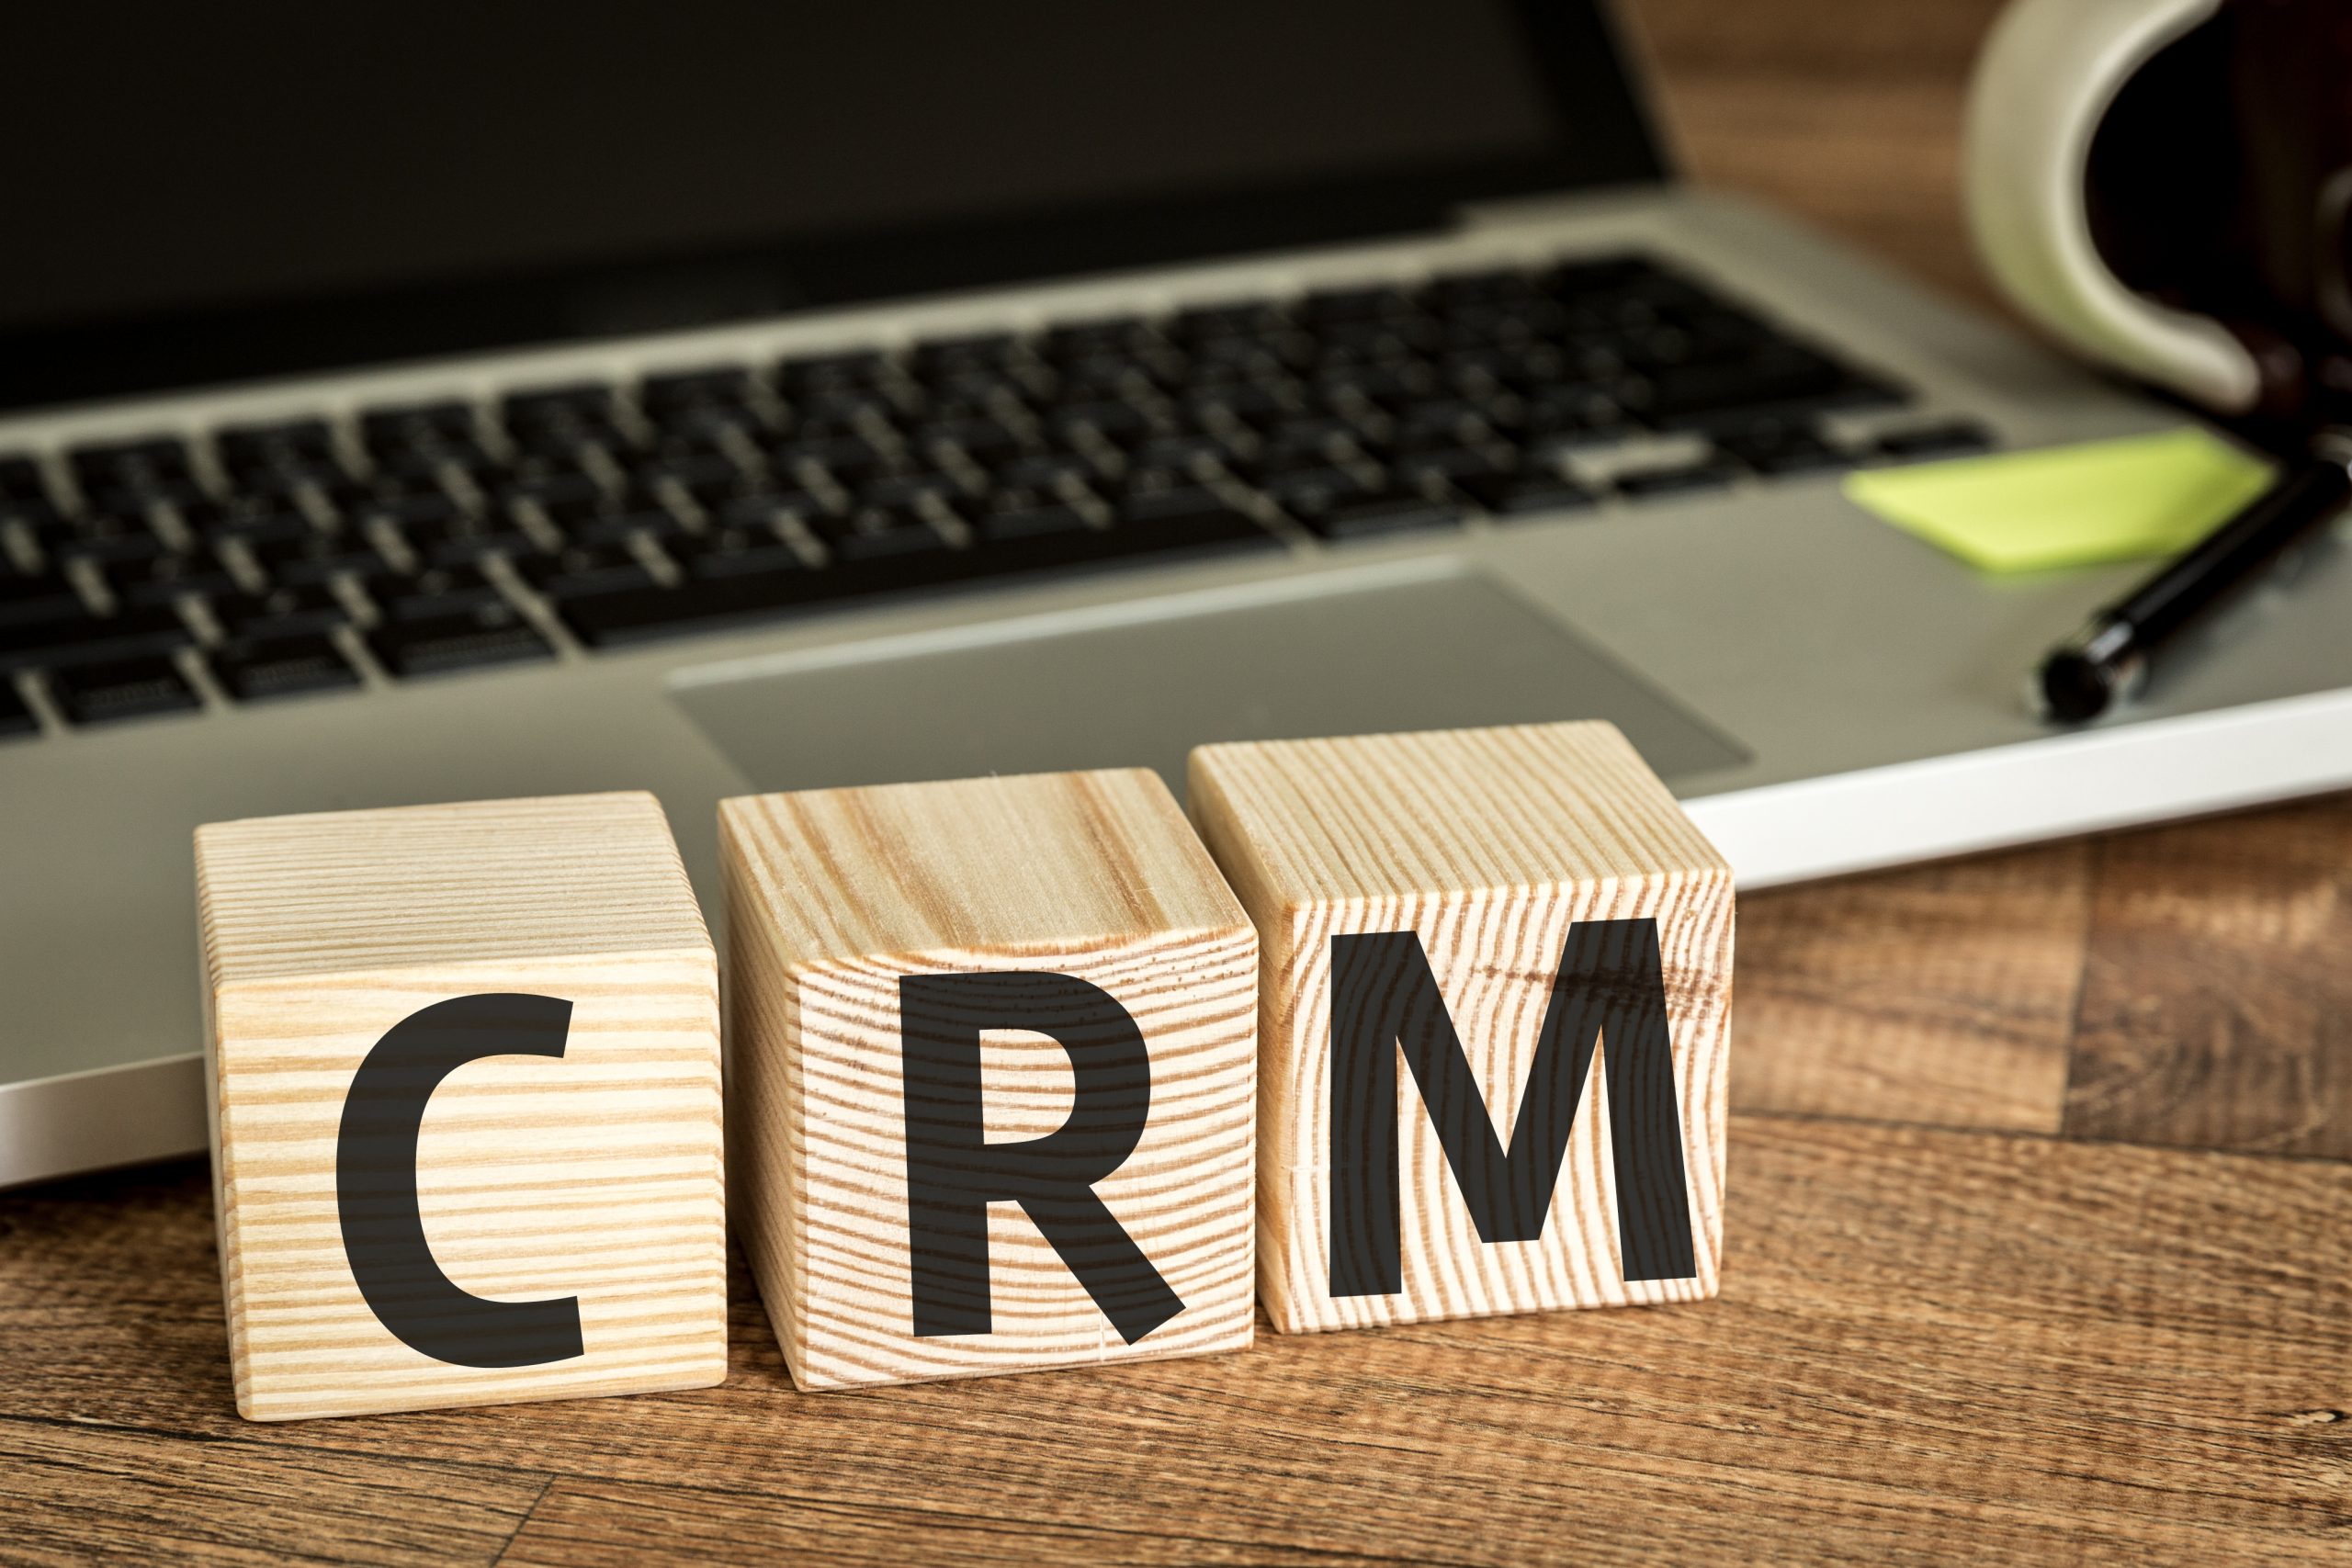 Laptop keyboard behind three wooden blocks that have the letters "CRM". 